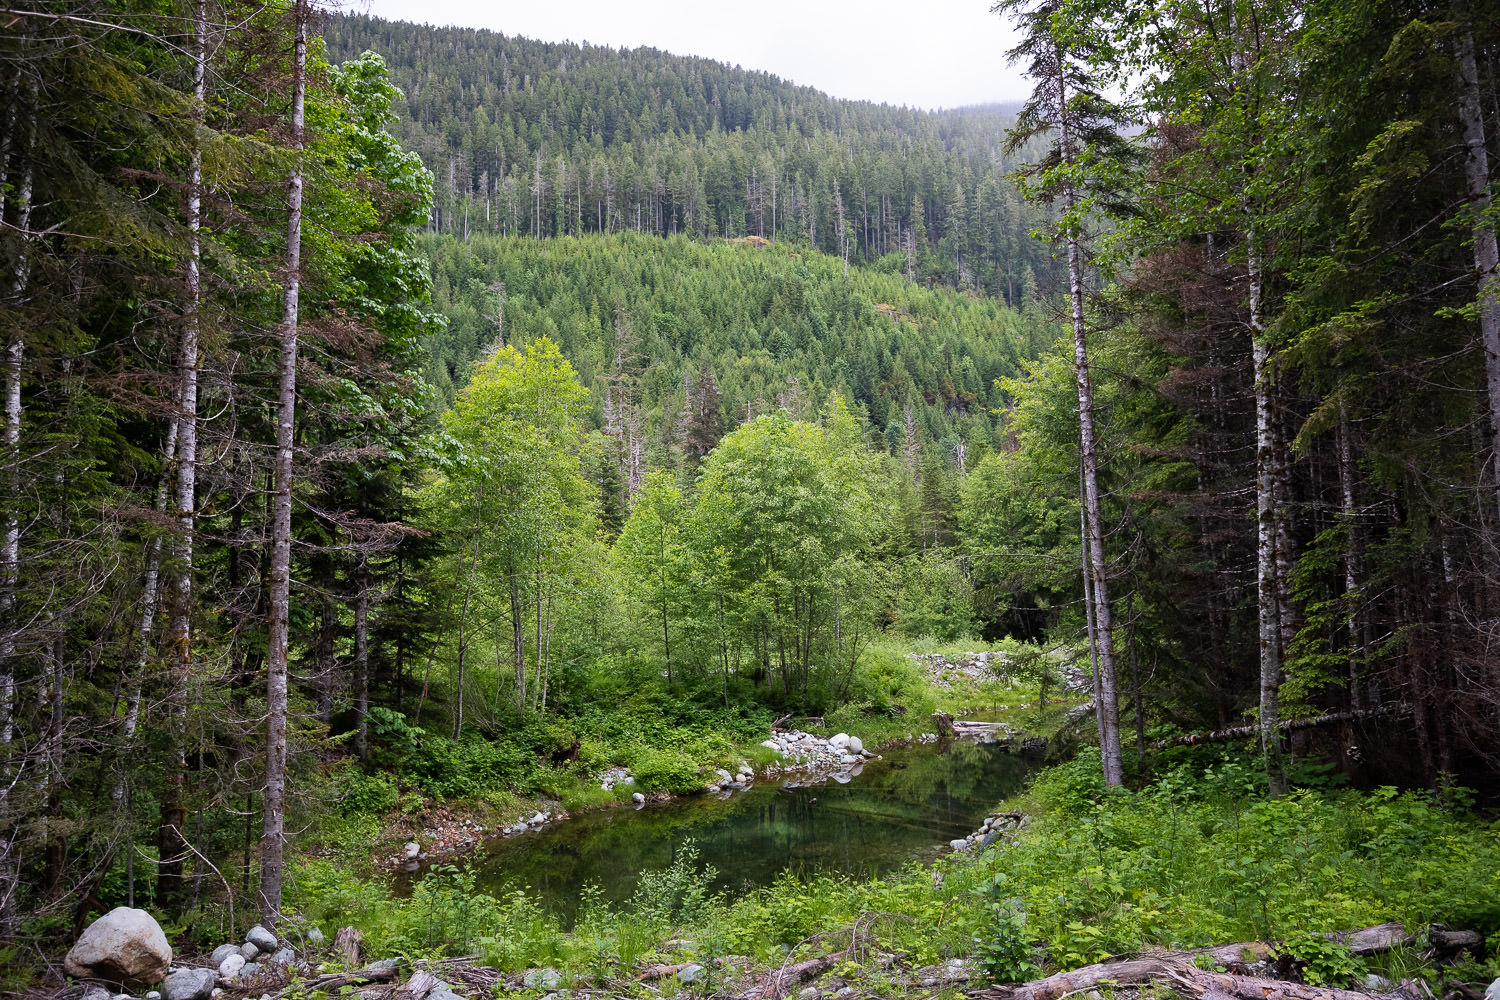 Salmon habitat enhancement area along the Taylor River. The slopes intended for clearcut logging are found above.